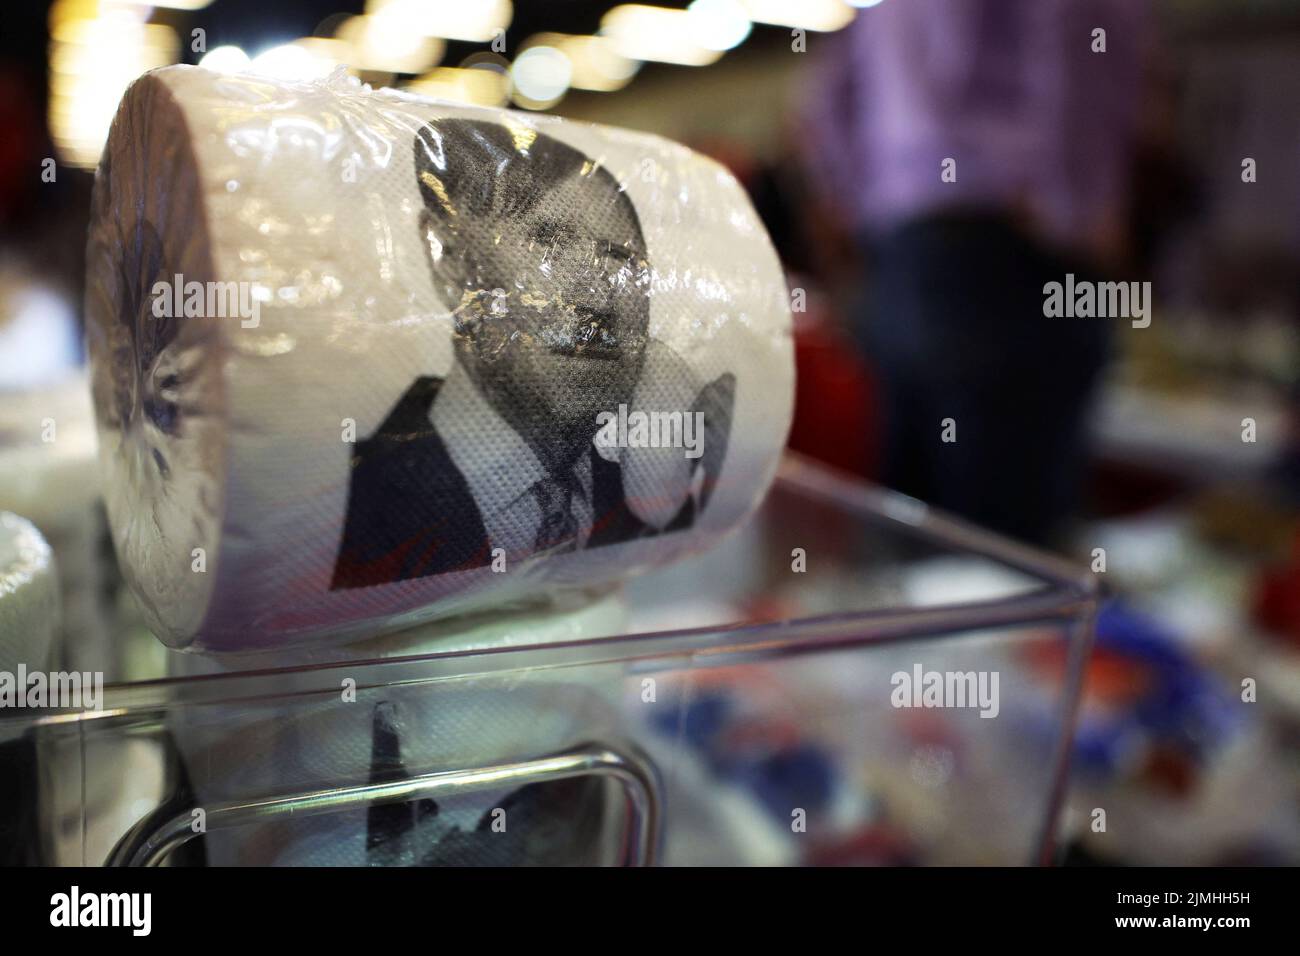 Toilet paper rolls depicting U.S. President Joe Biden as Adolf Hitler are displayed for sale at the Conservative Political Action Conference (CPAC) in Dallas, Texas, U.S., August 6, 2022.  REUTERS/Brian Snyder Stock Photo